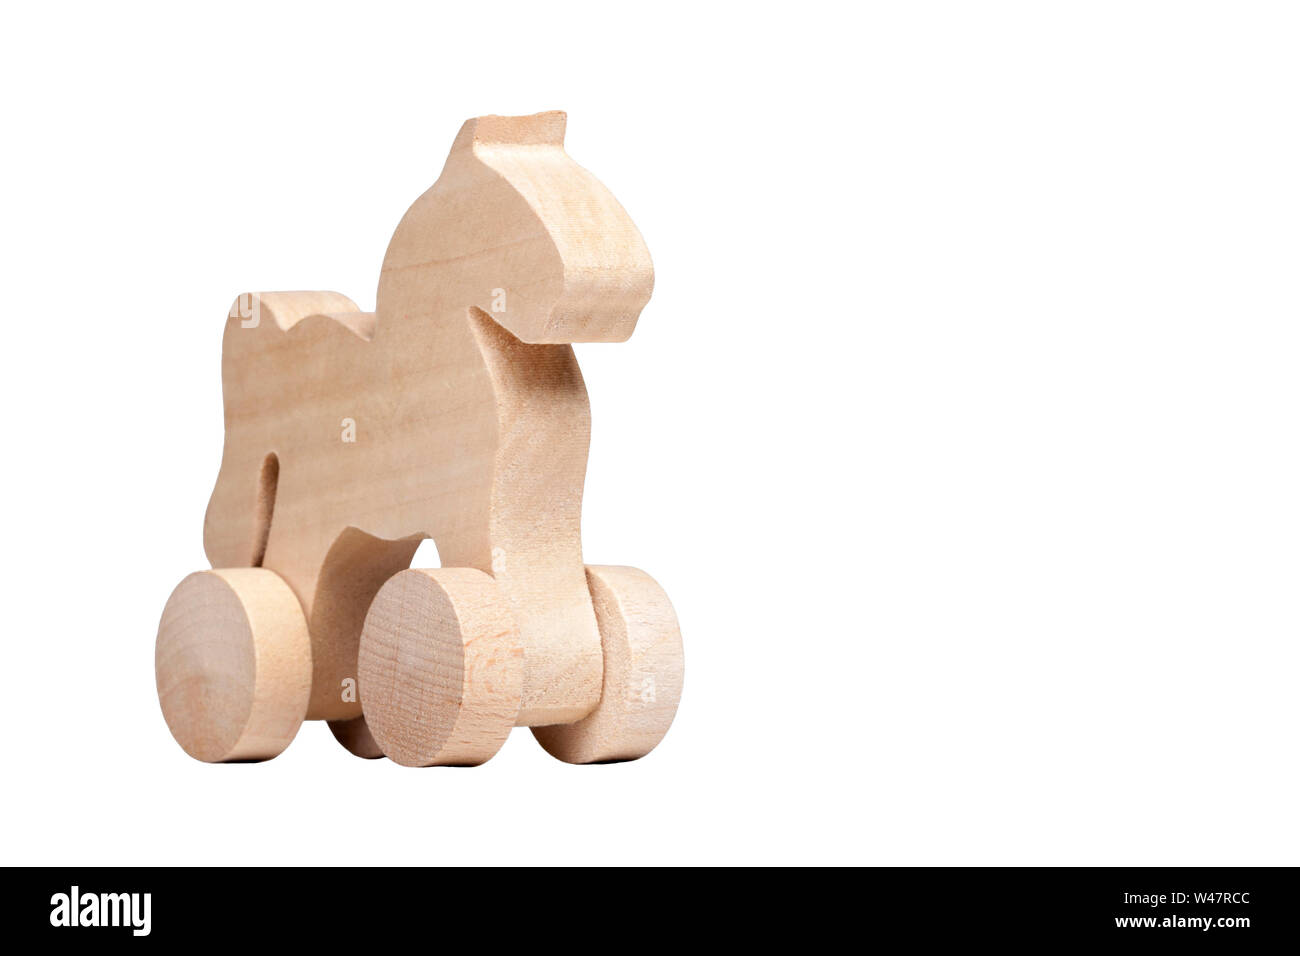 Minimalistic small wooden horse figure design on wheels, concept of trojan horse and mischief or simple child's toy isolated on white Stock Photo